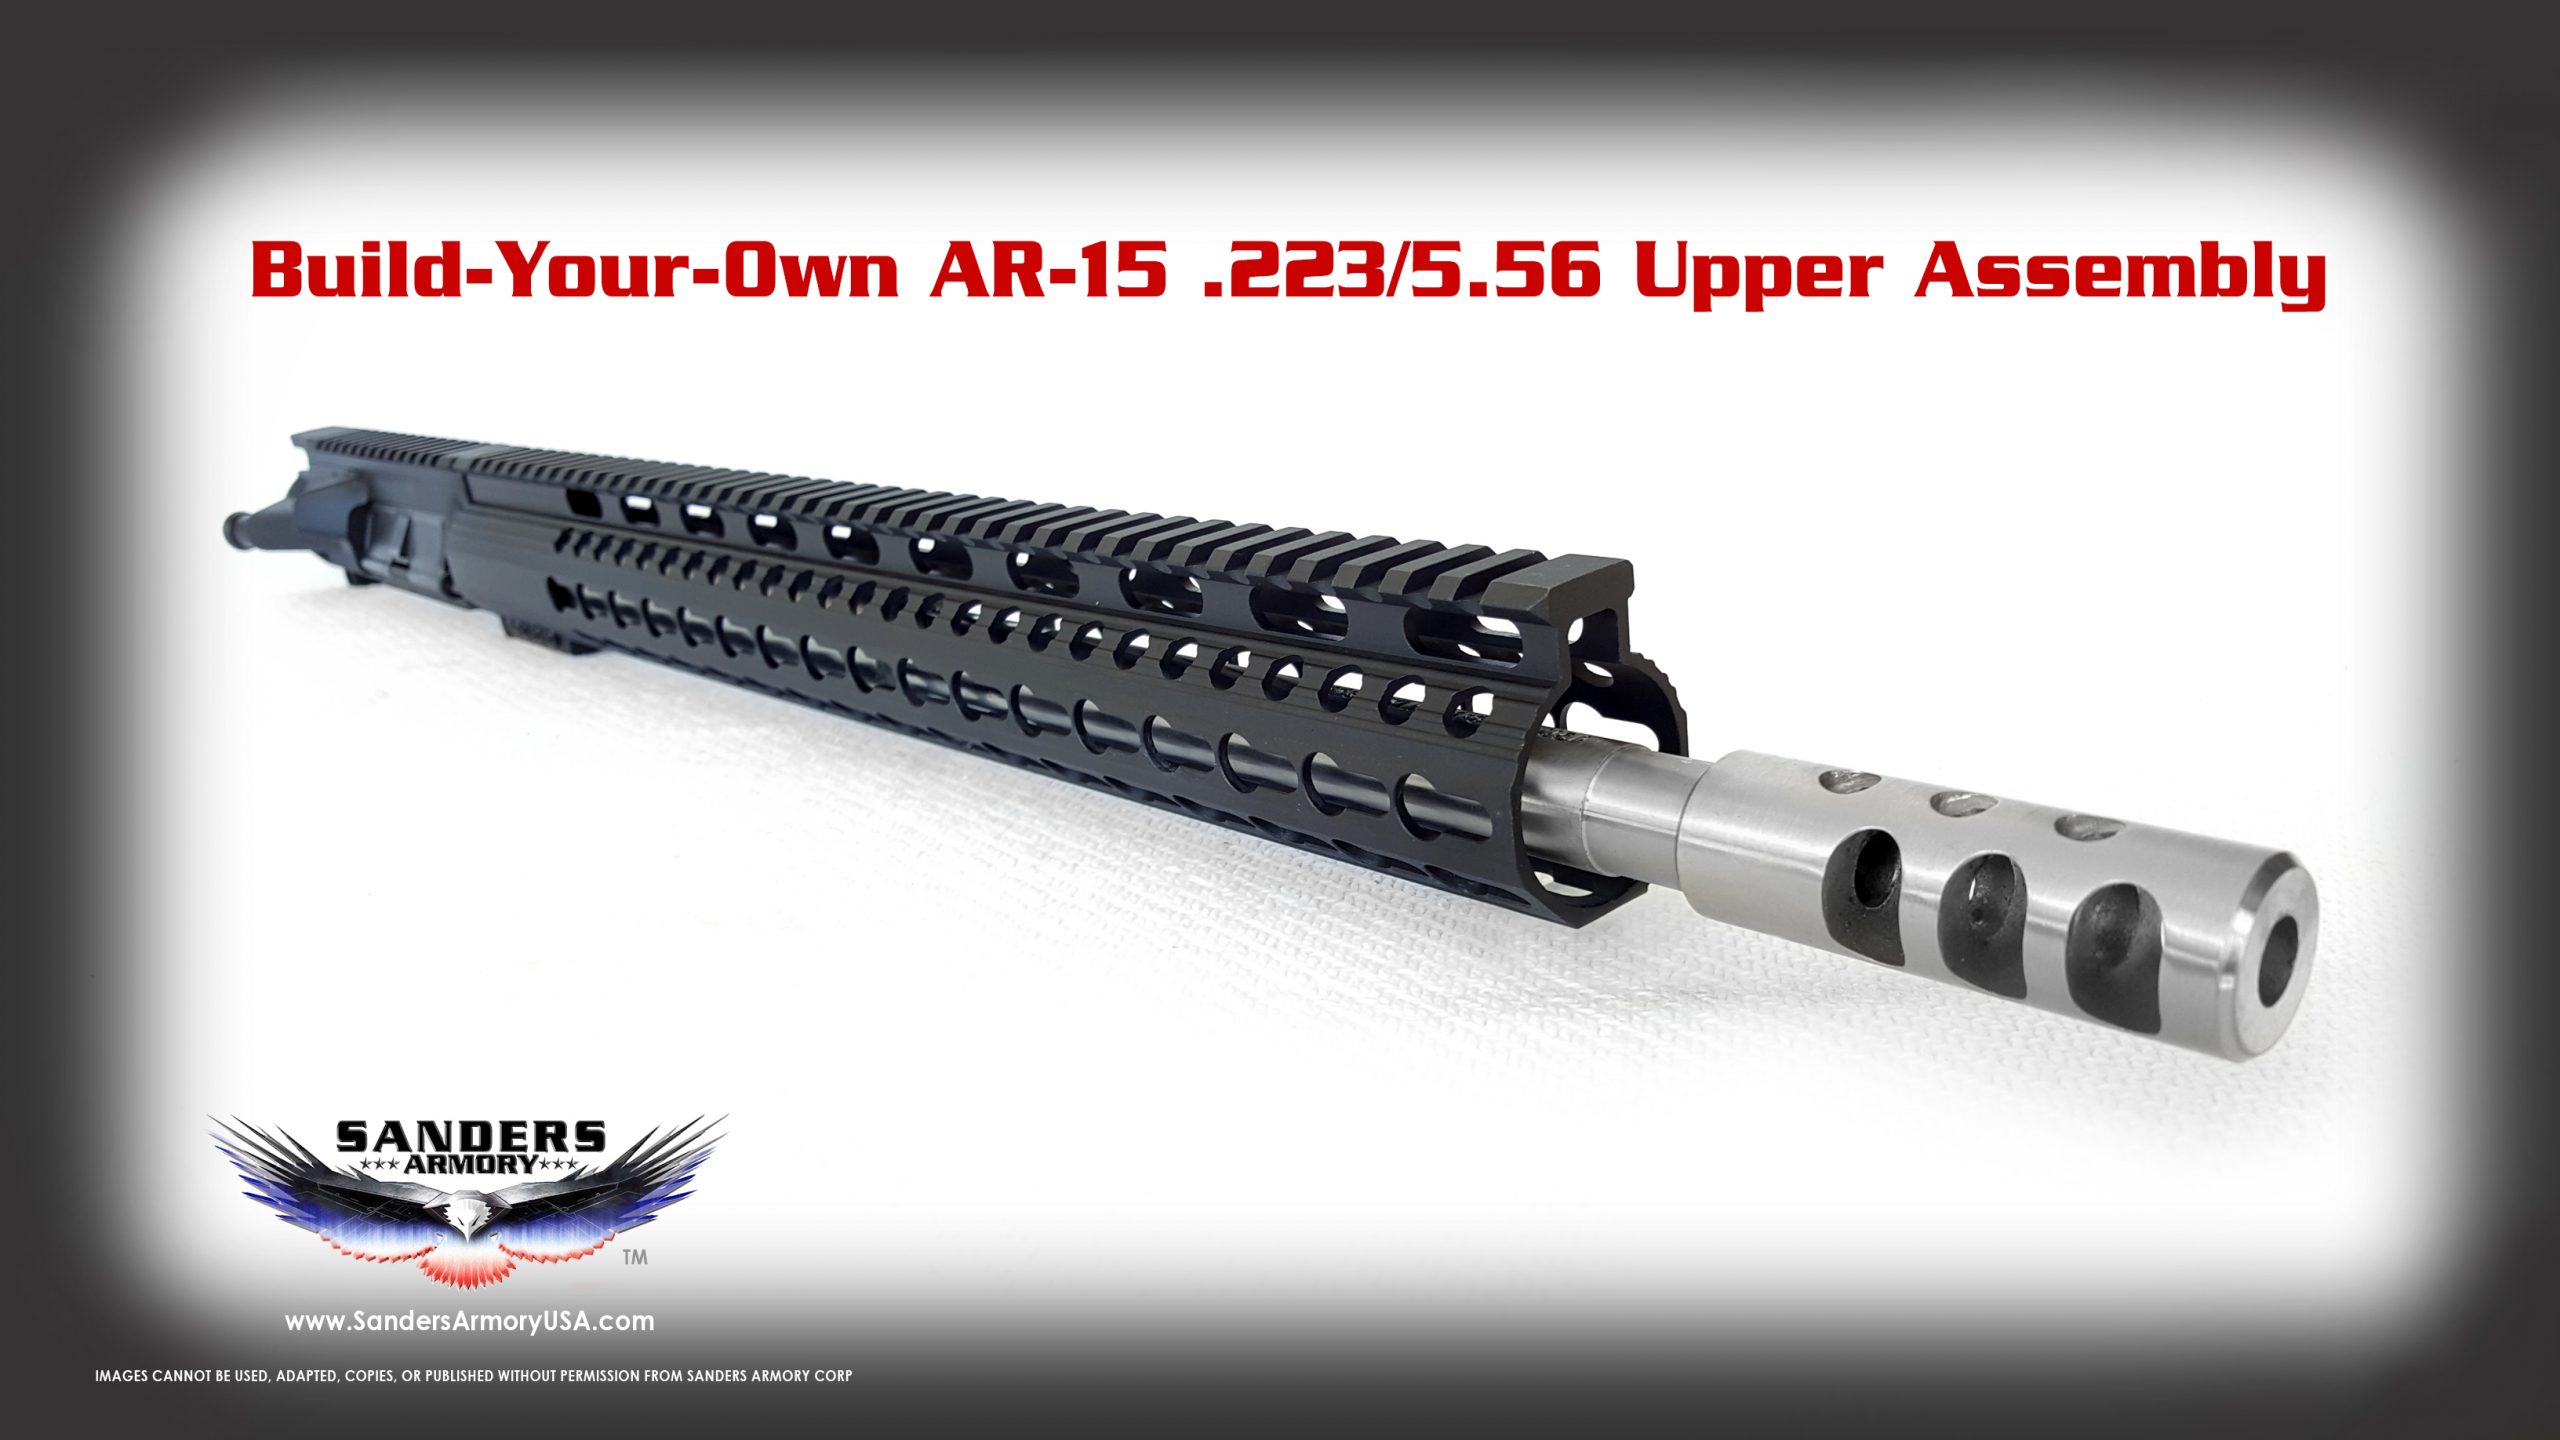 Sanders Armory Build Your Own .223 Wylde / 5.56 NATO Upper Assembly